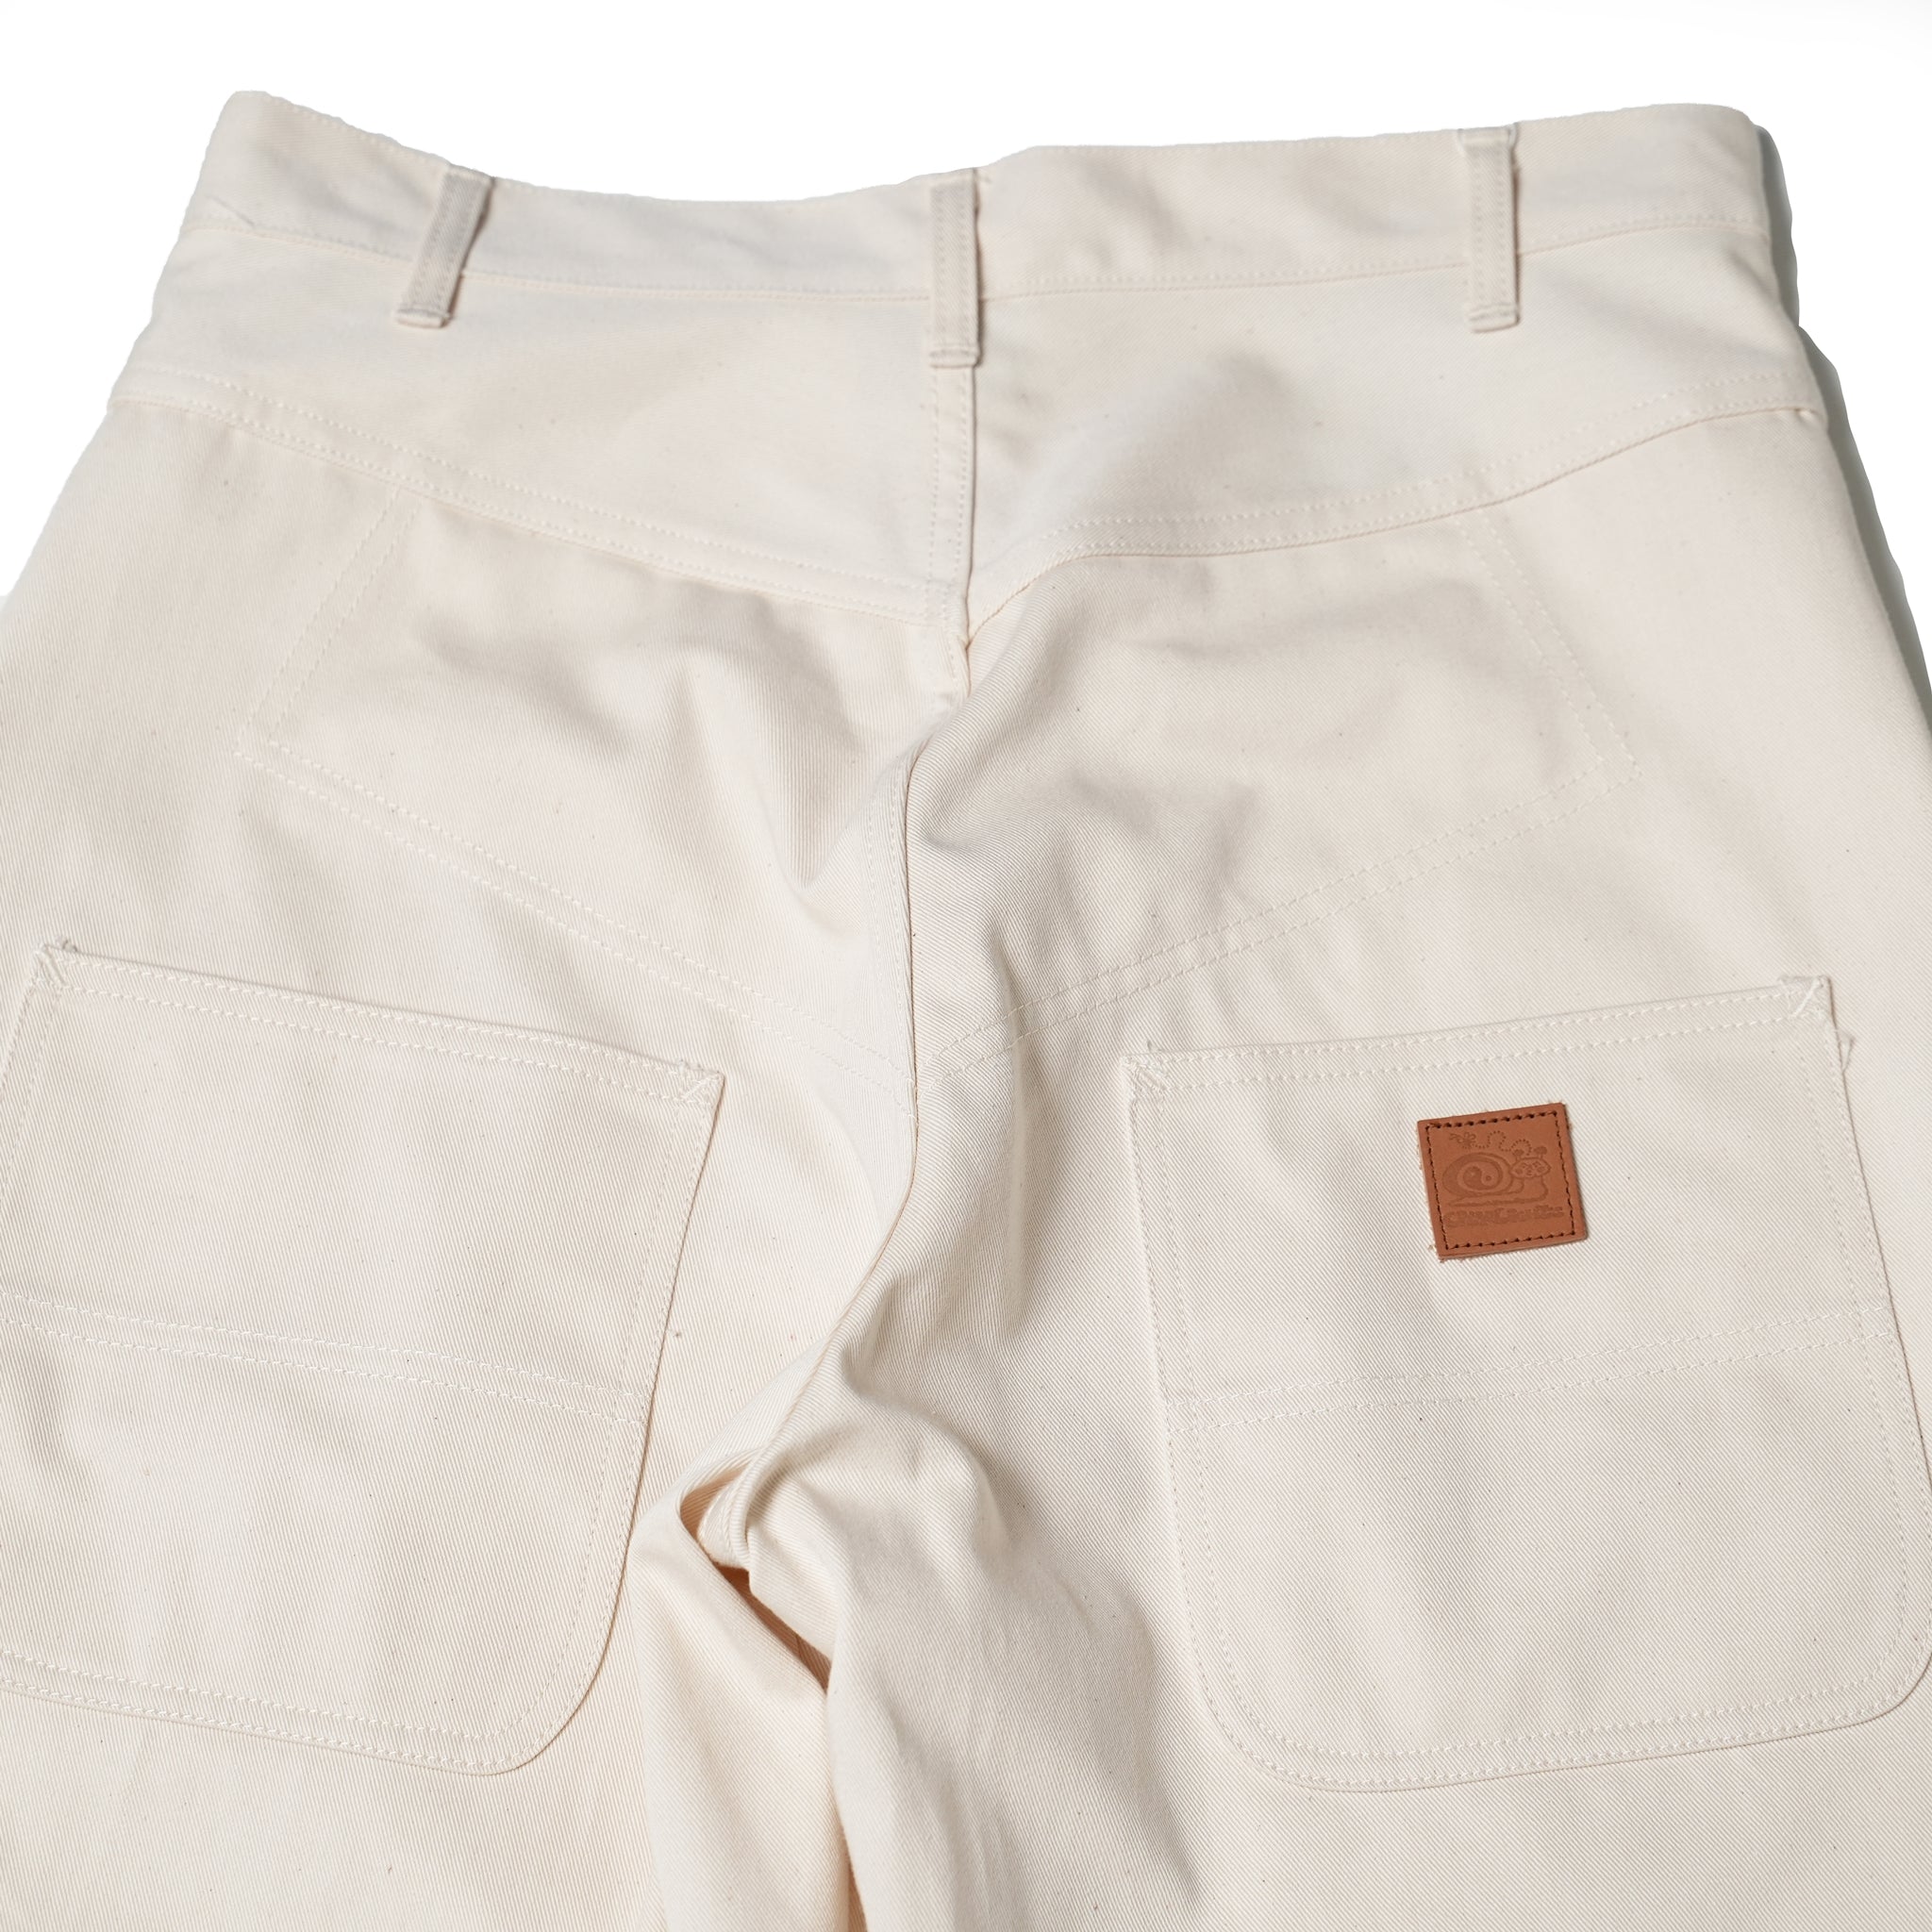 Name: YING-YANG WORK PANTS | Color: Natural/Green | Size: S/M/L【CITYLIGHTS PRODUCTS_シティライツプロダクツ】